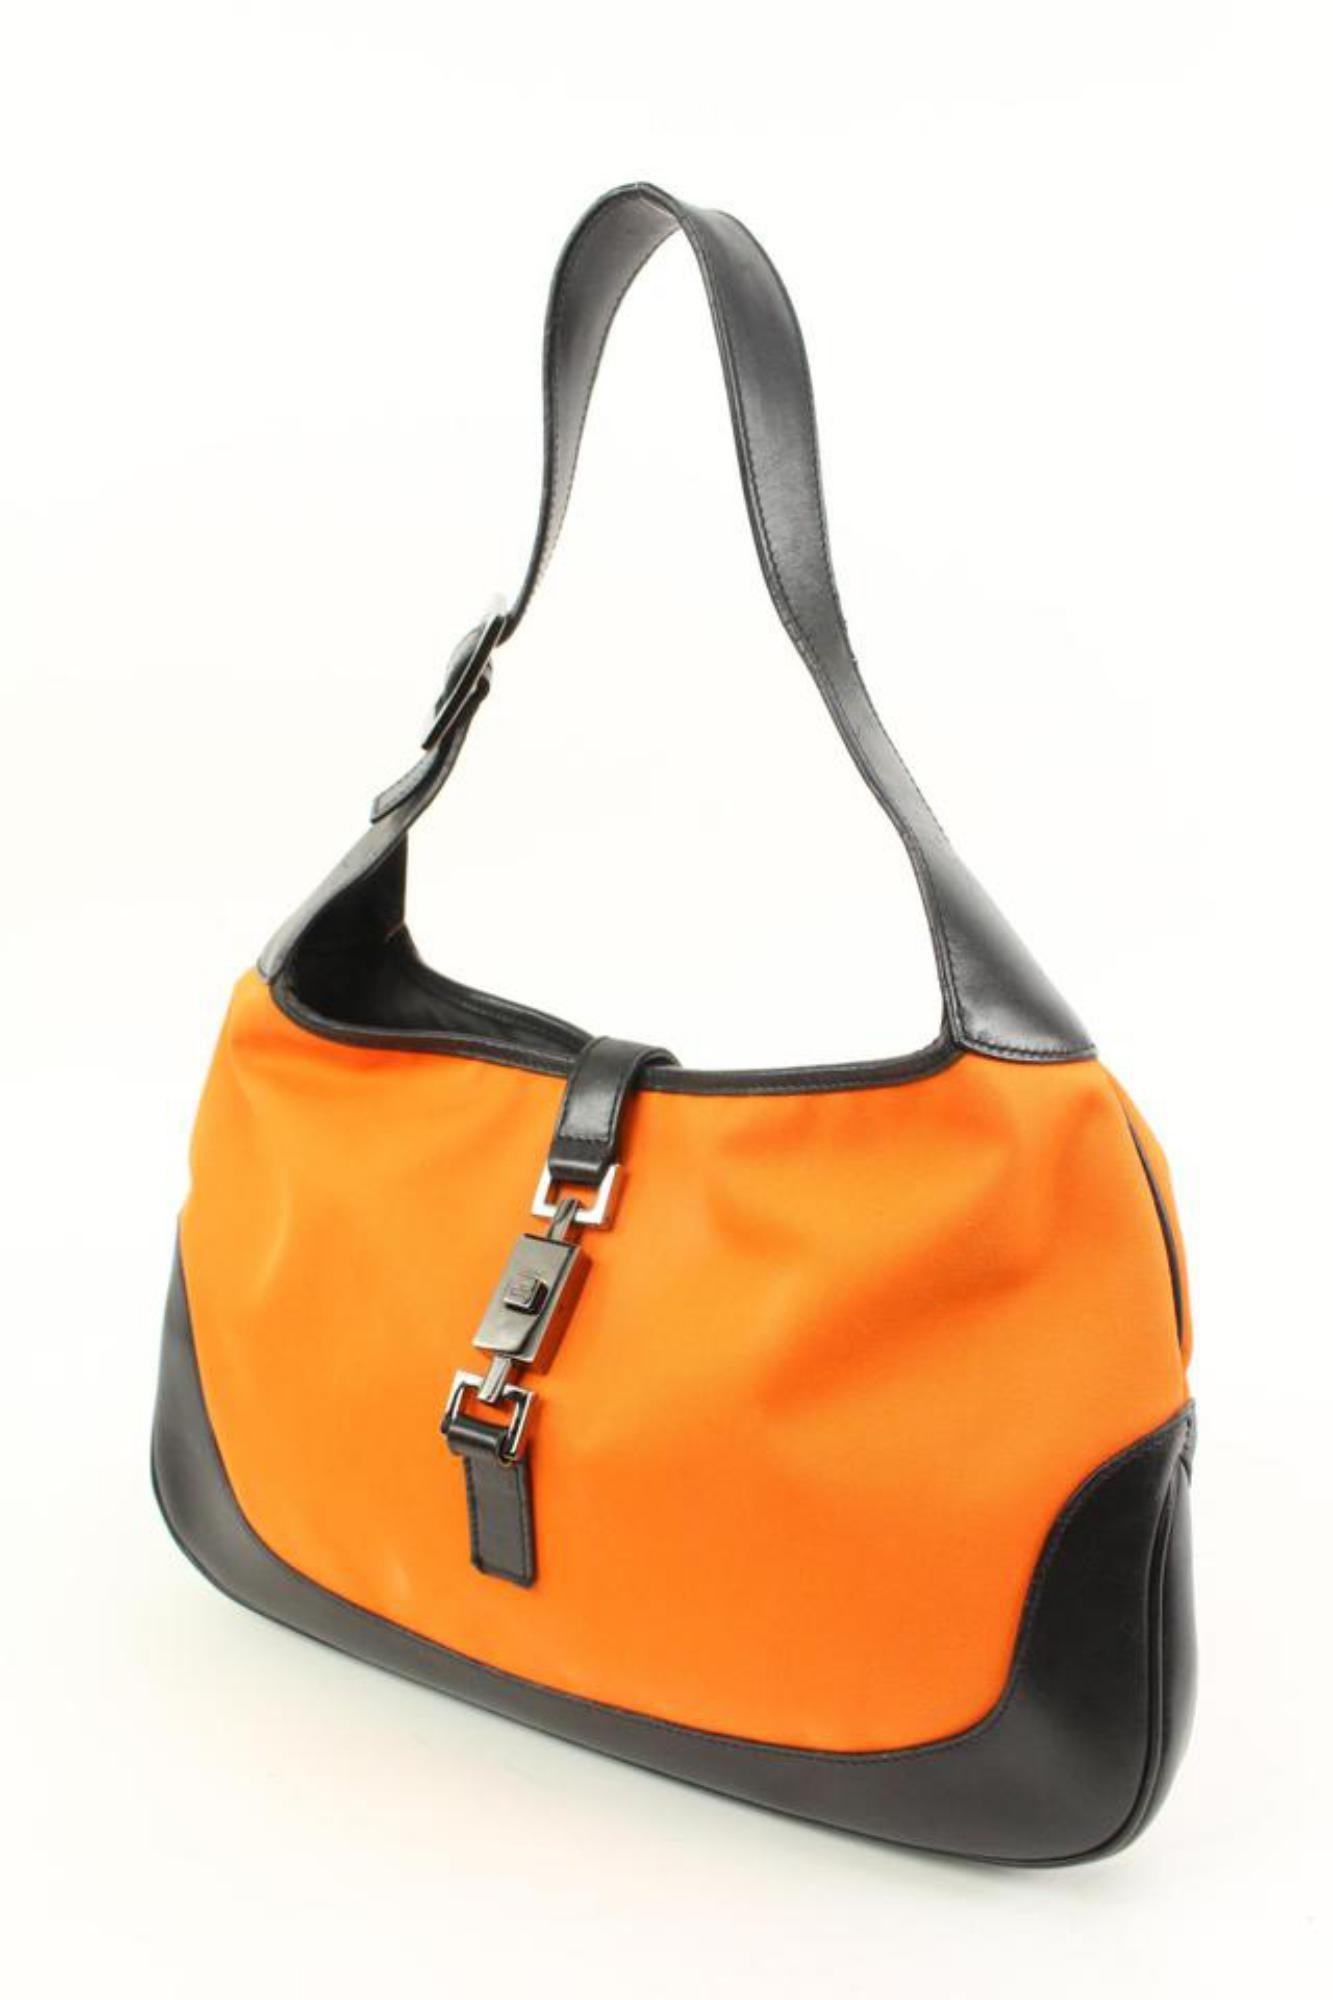 Gucci Orange x Black Jackie-O Hobo Bag 76g328s
Date Code/Serial Number: 001-3306-001998
Made In: Italy
Measurements: Length:  12.5